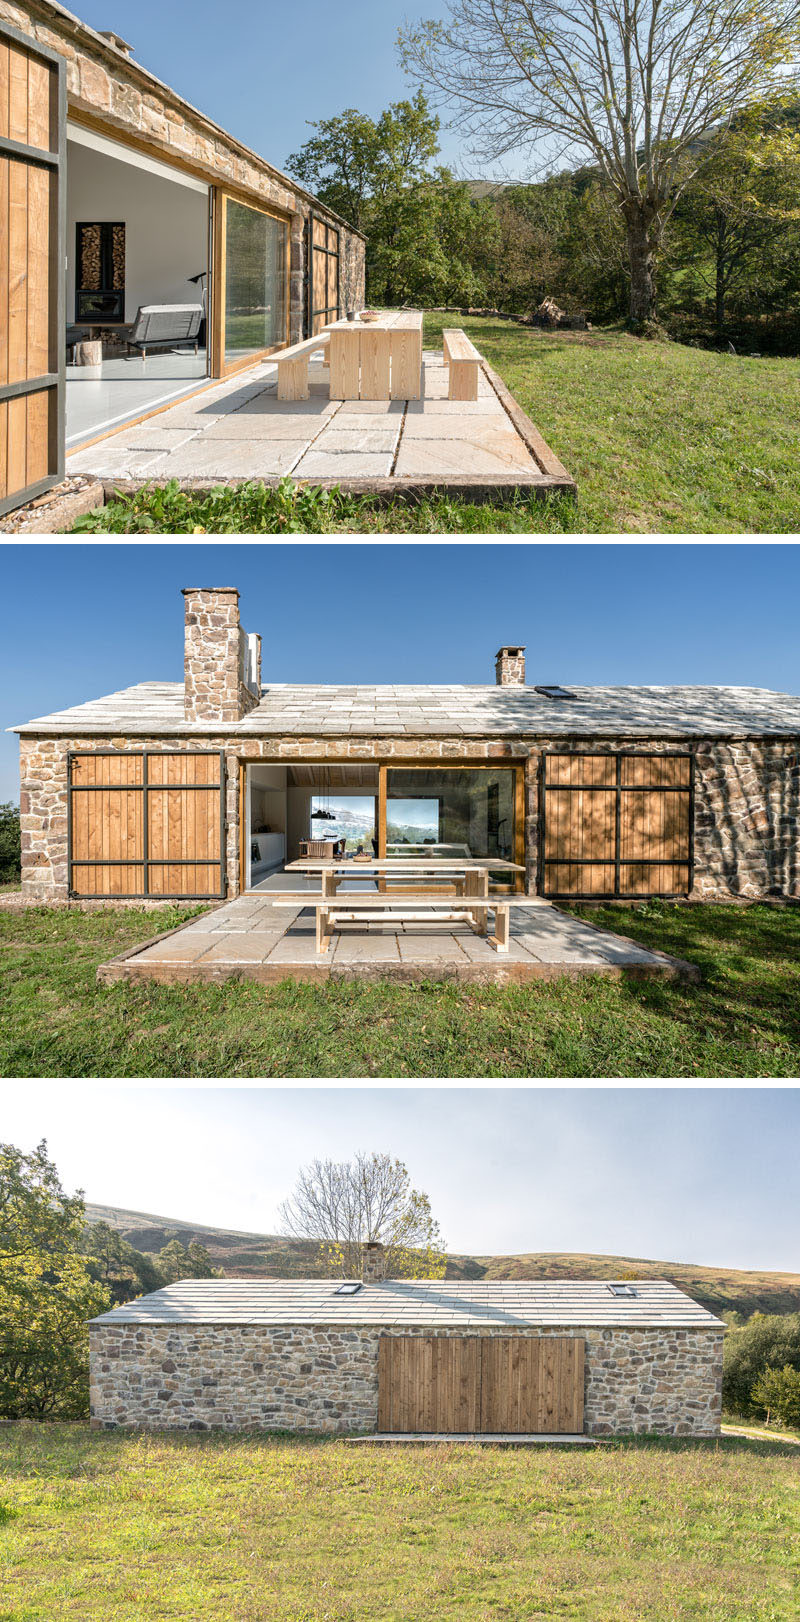 This contemporary stone cottage has an outdoor dining area that opens up a grassy field. Large wood and steel doors can be closed to protect the cottage from the elements, and provide privacy if needed. #StoneCottage #OutdoorDining #ContemporaryCottage